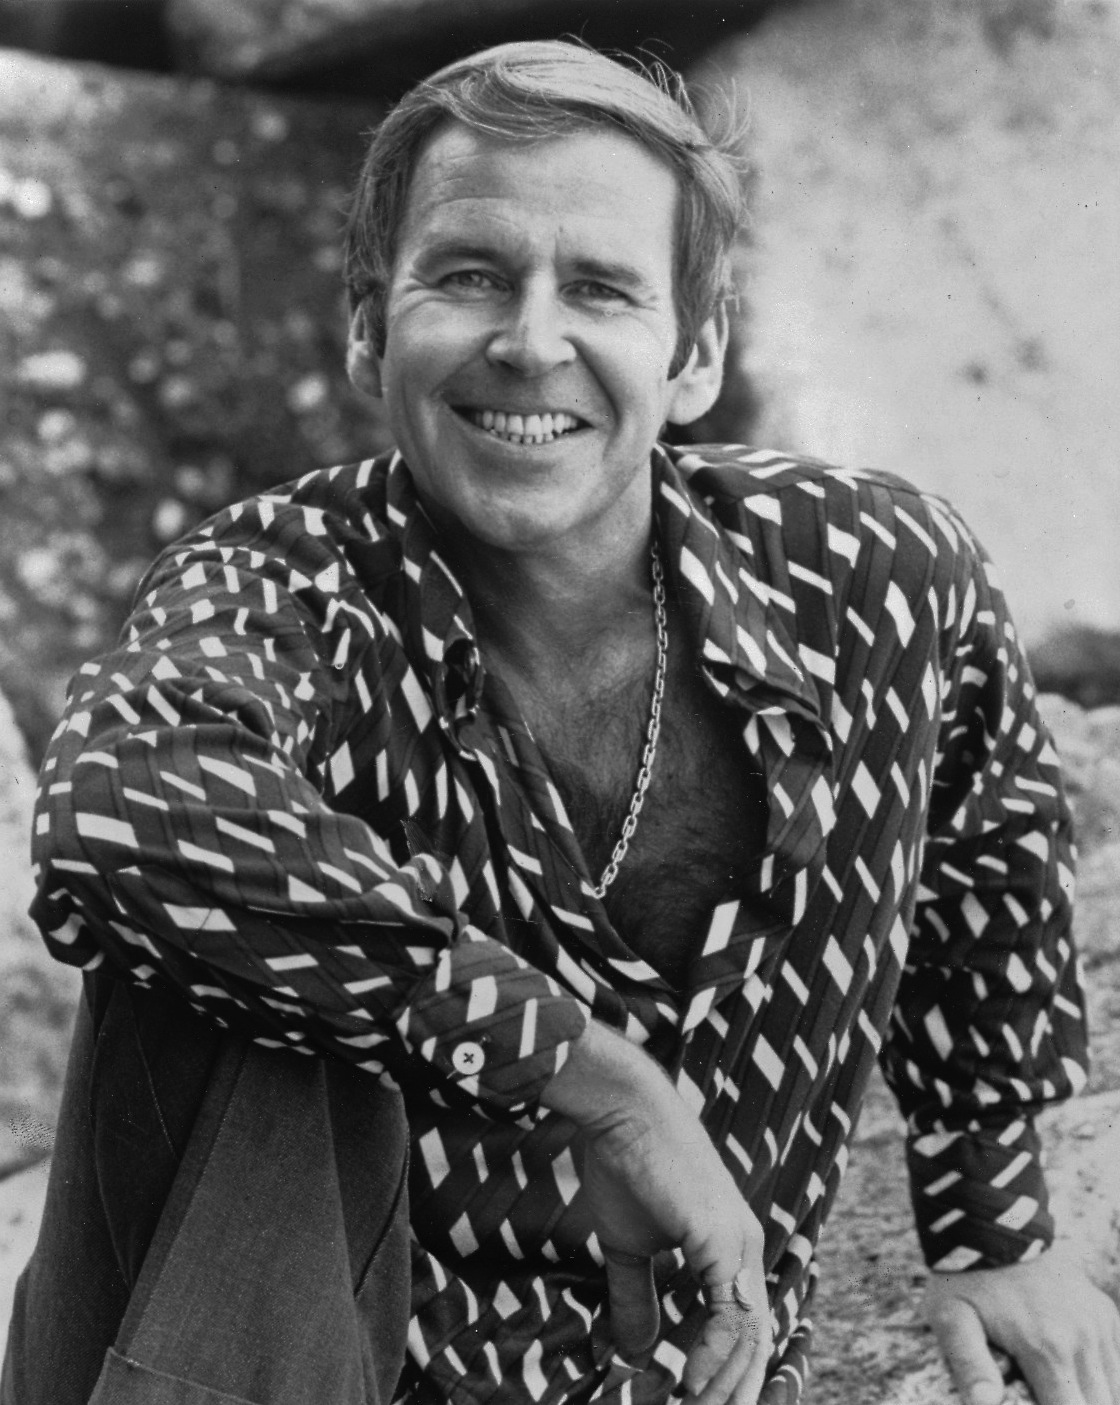 Paul Lynde as "Uncle Arthur" from the television series "Bewitched"